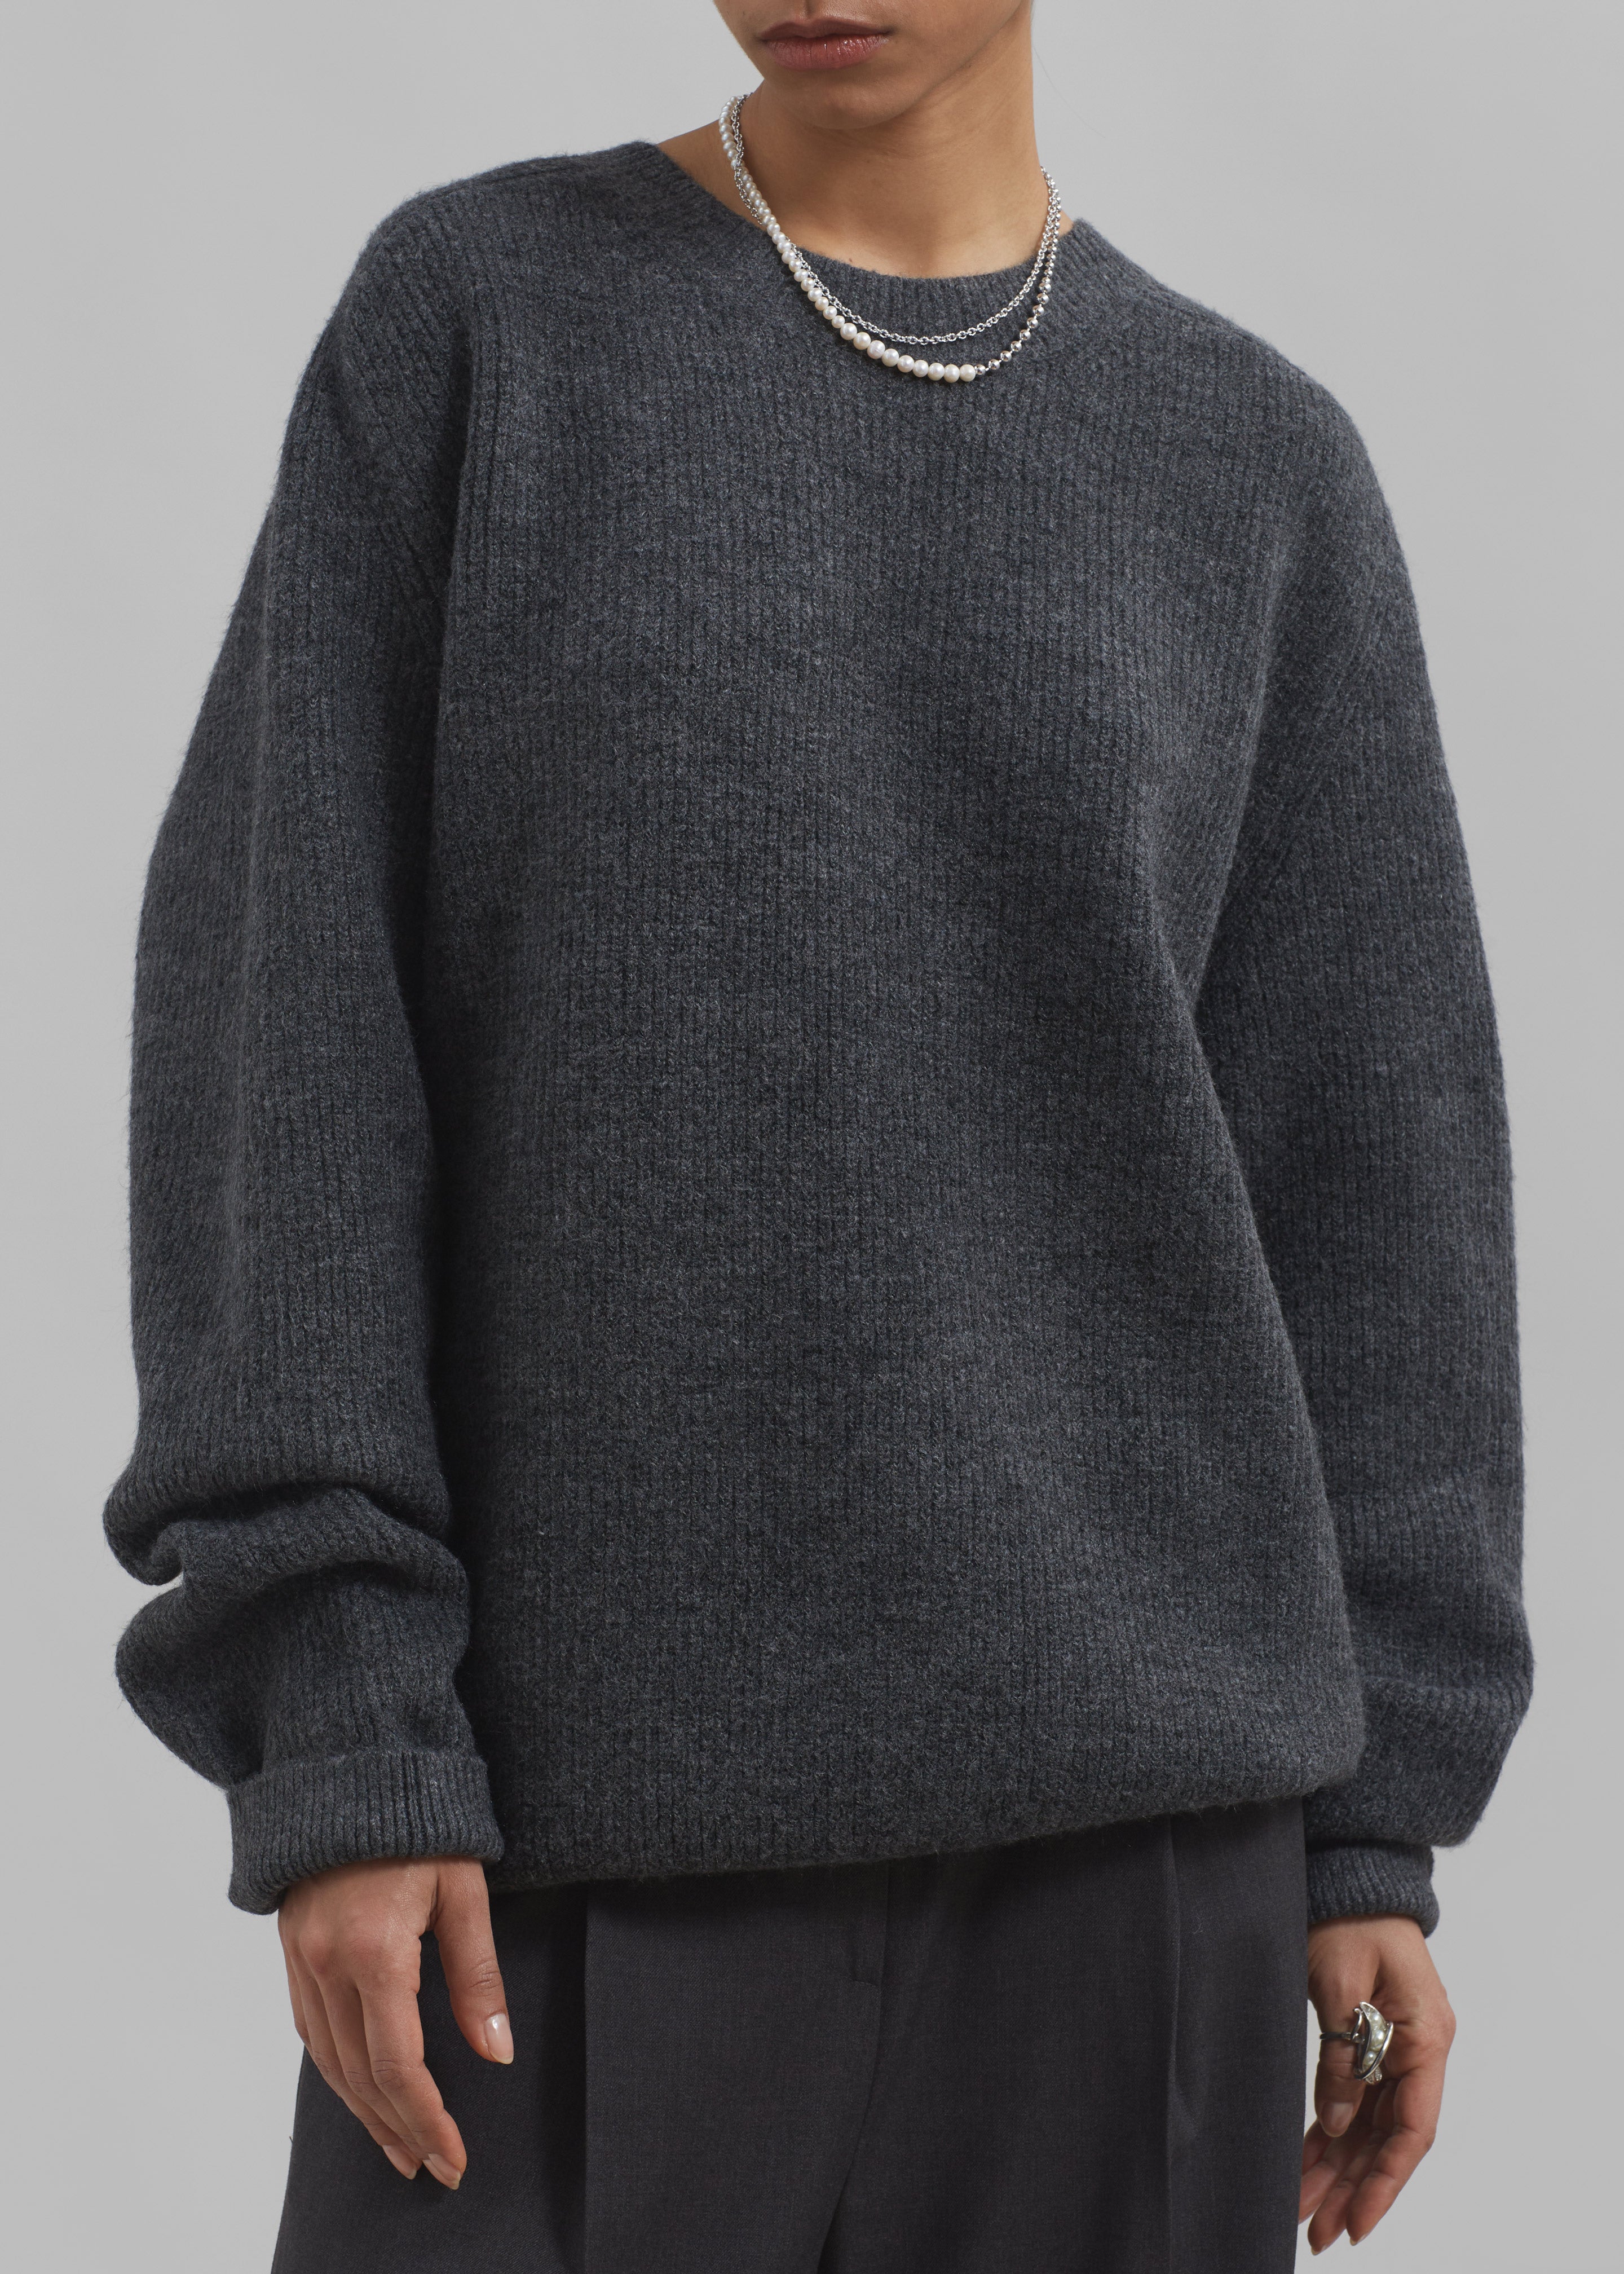 Emory Sweater - Charcoal - 4